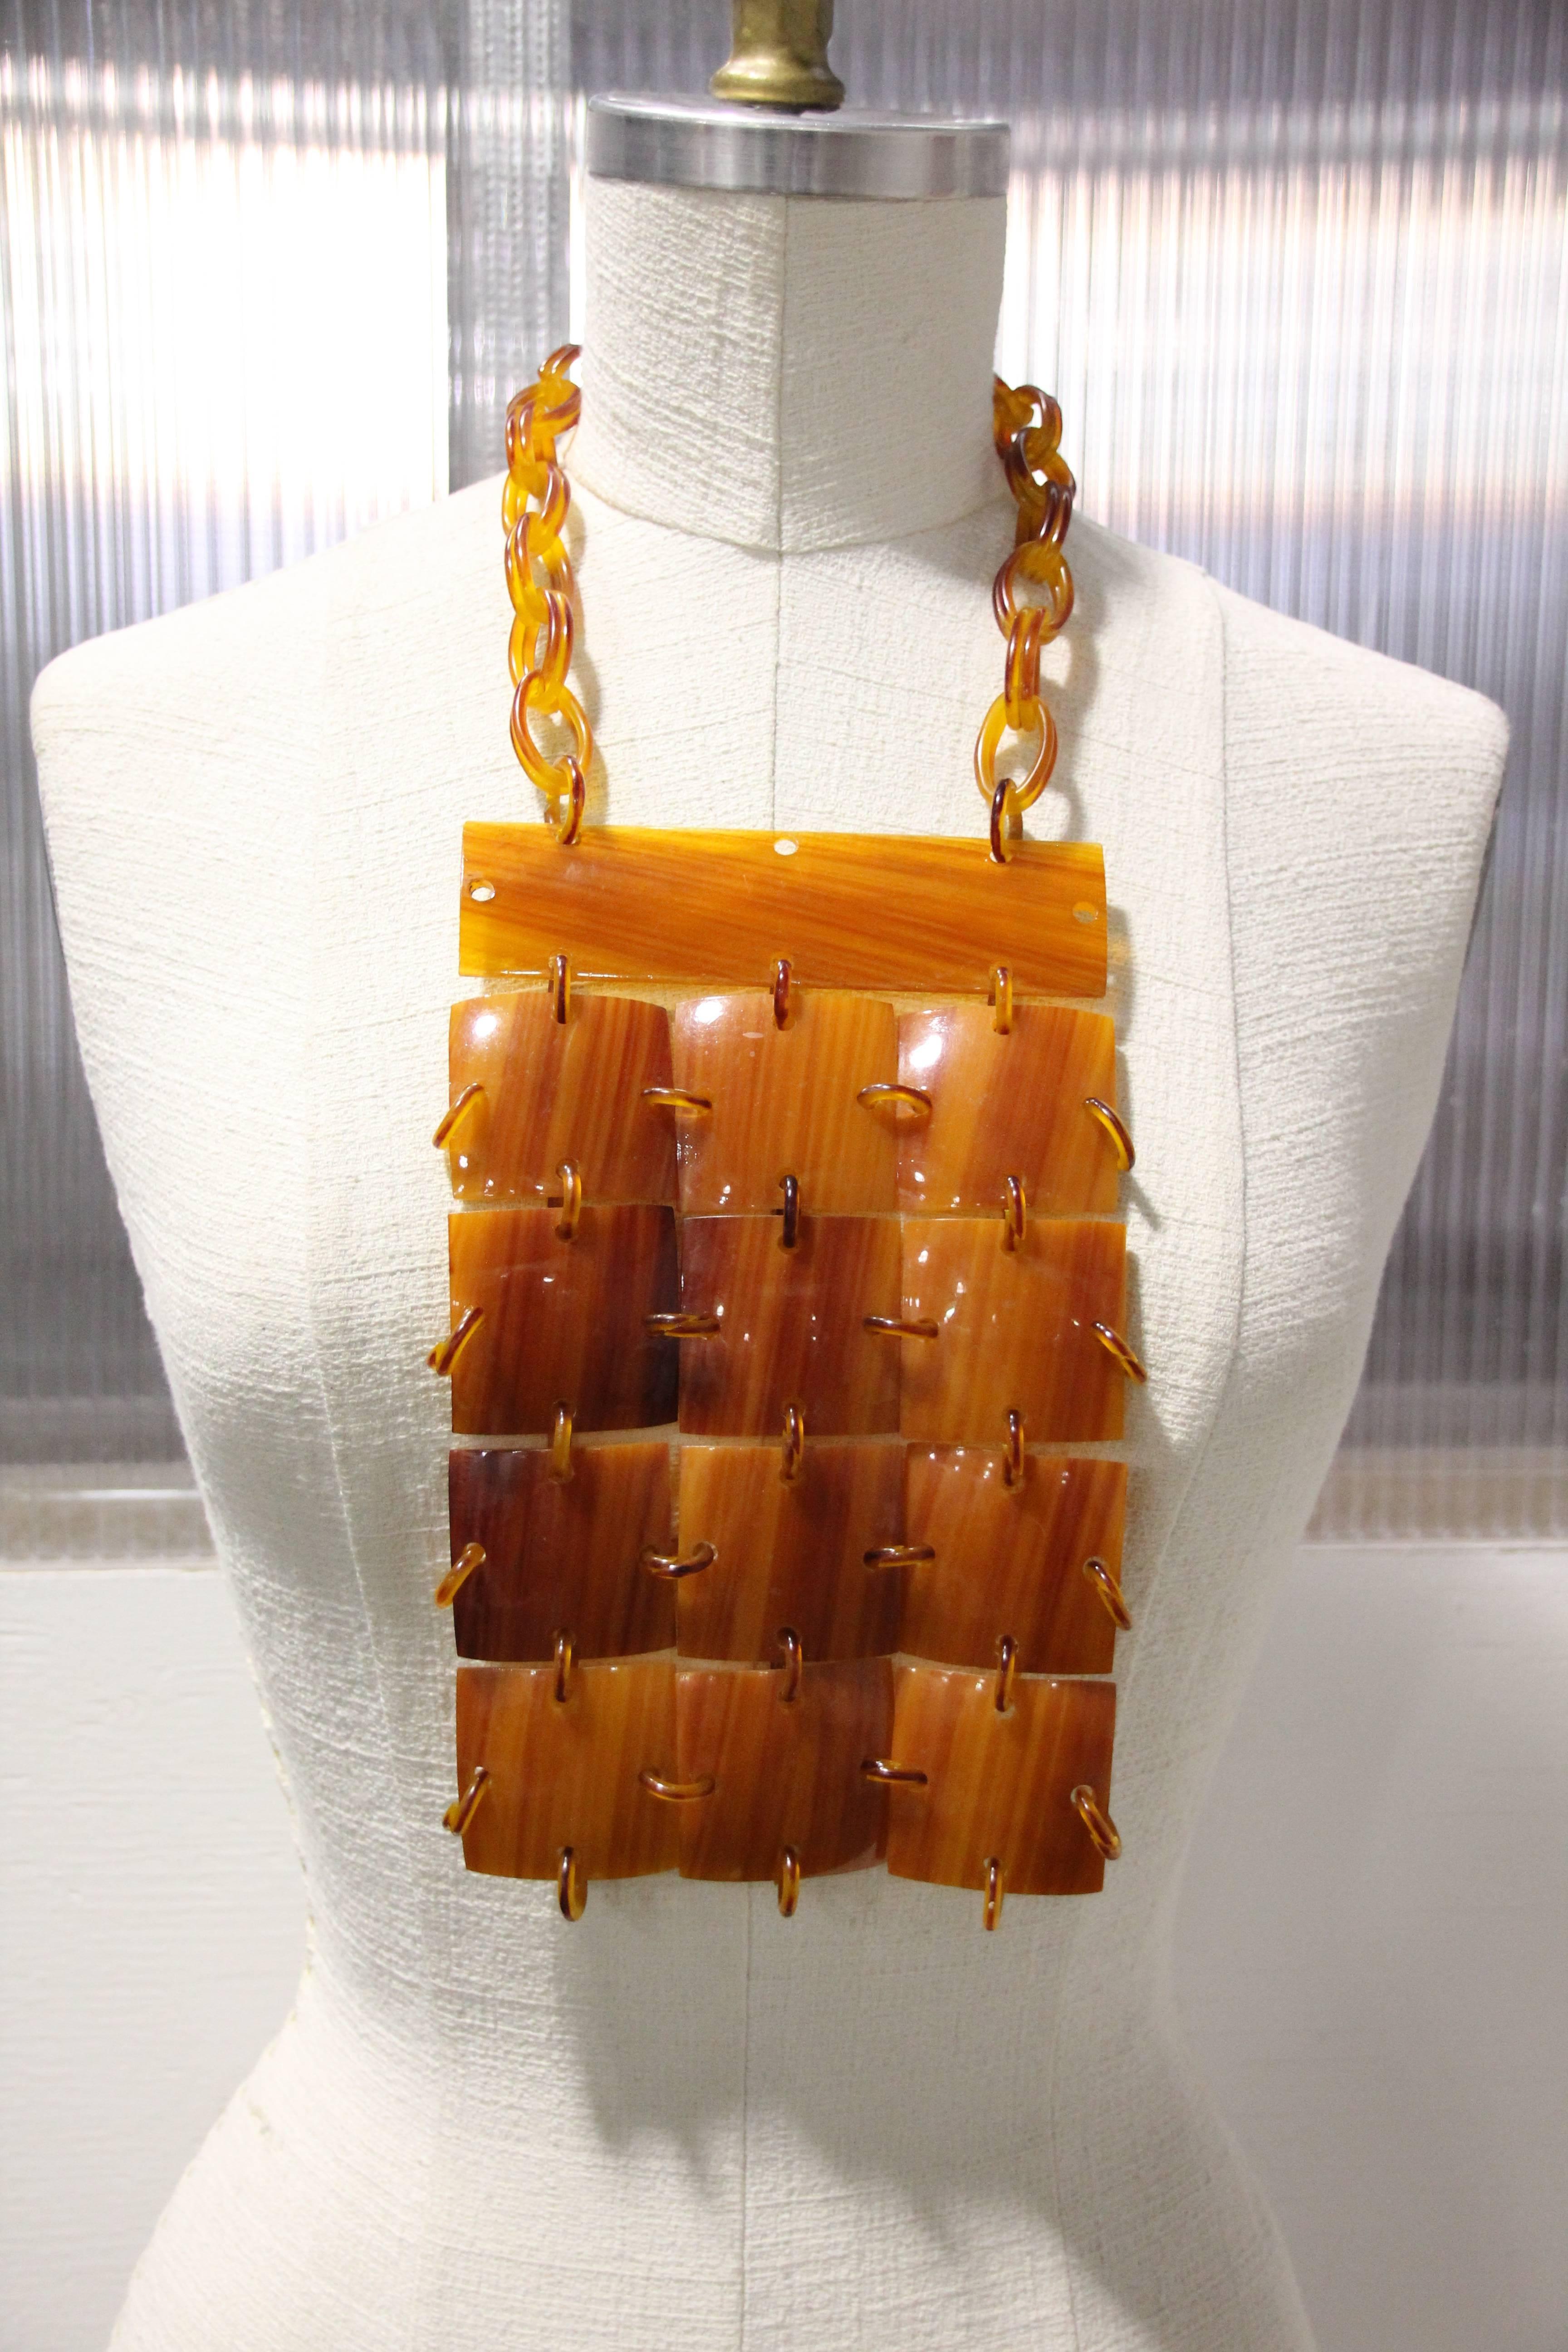 This 1960's carmel color bakelite bib necklace is made of square shaped tiles that are connected with jump rings of the same material as well as the bakelite chain around the neck. 
Large flat bakelite tile shaped bar connects all together to form